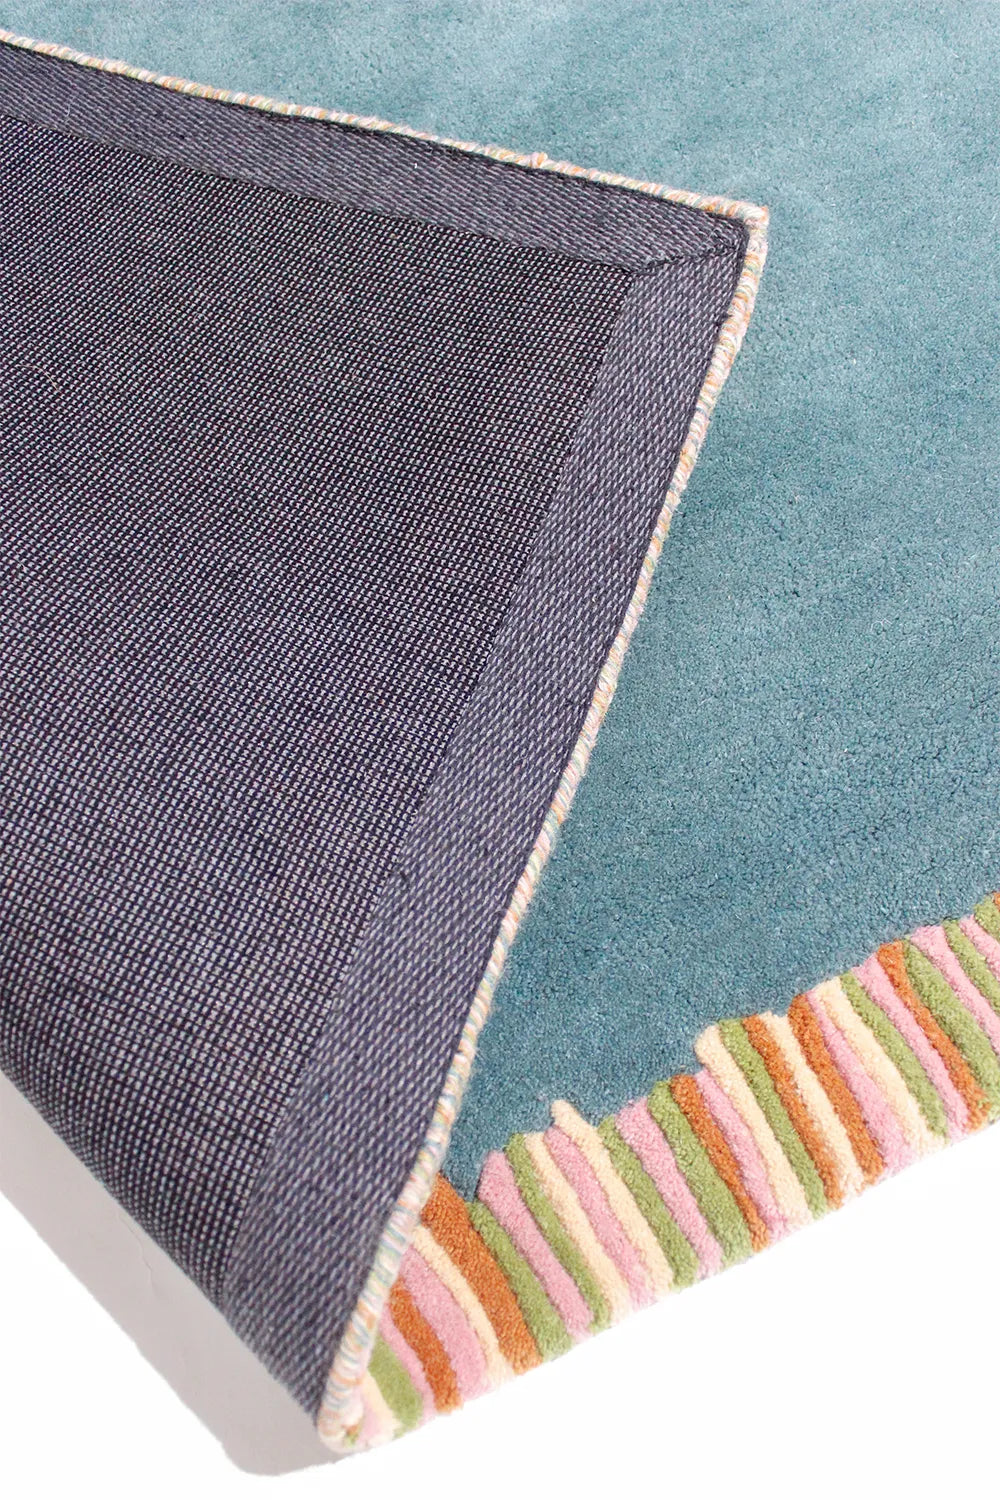 Stitched and Striped Tufted Rug